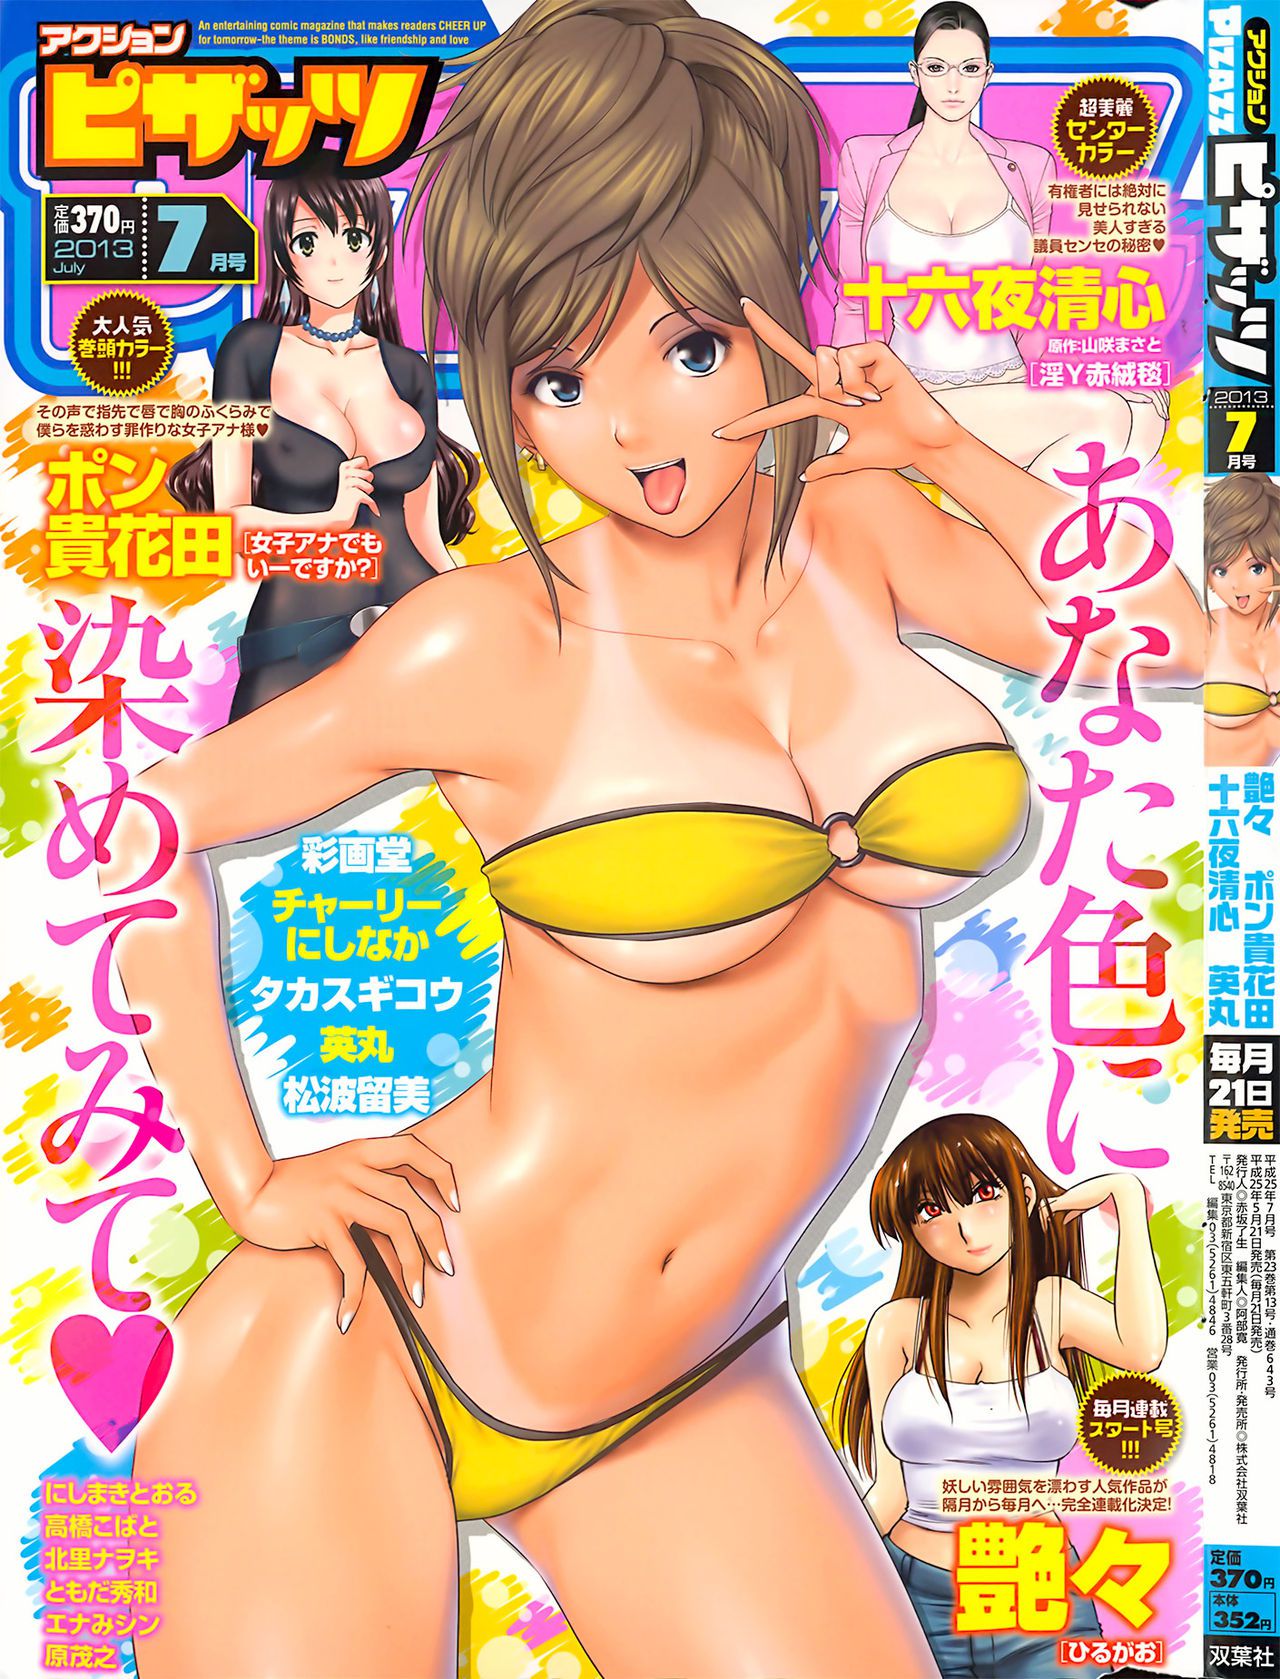 [Saigado] Cover Illustrations [彩画堂] Cover Illustrations 65